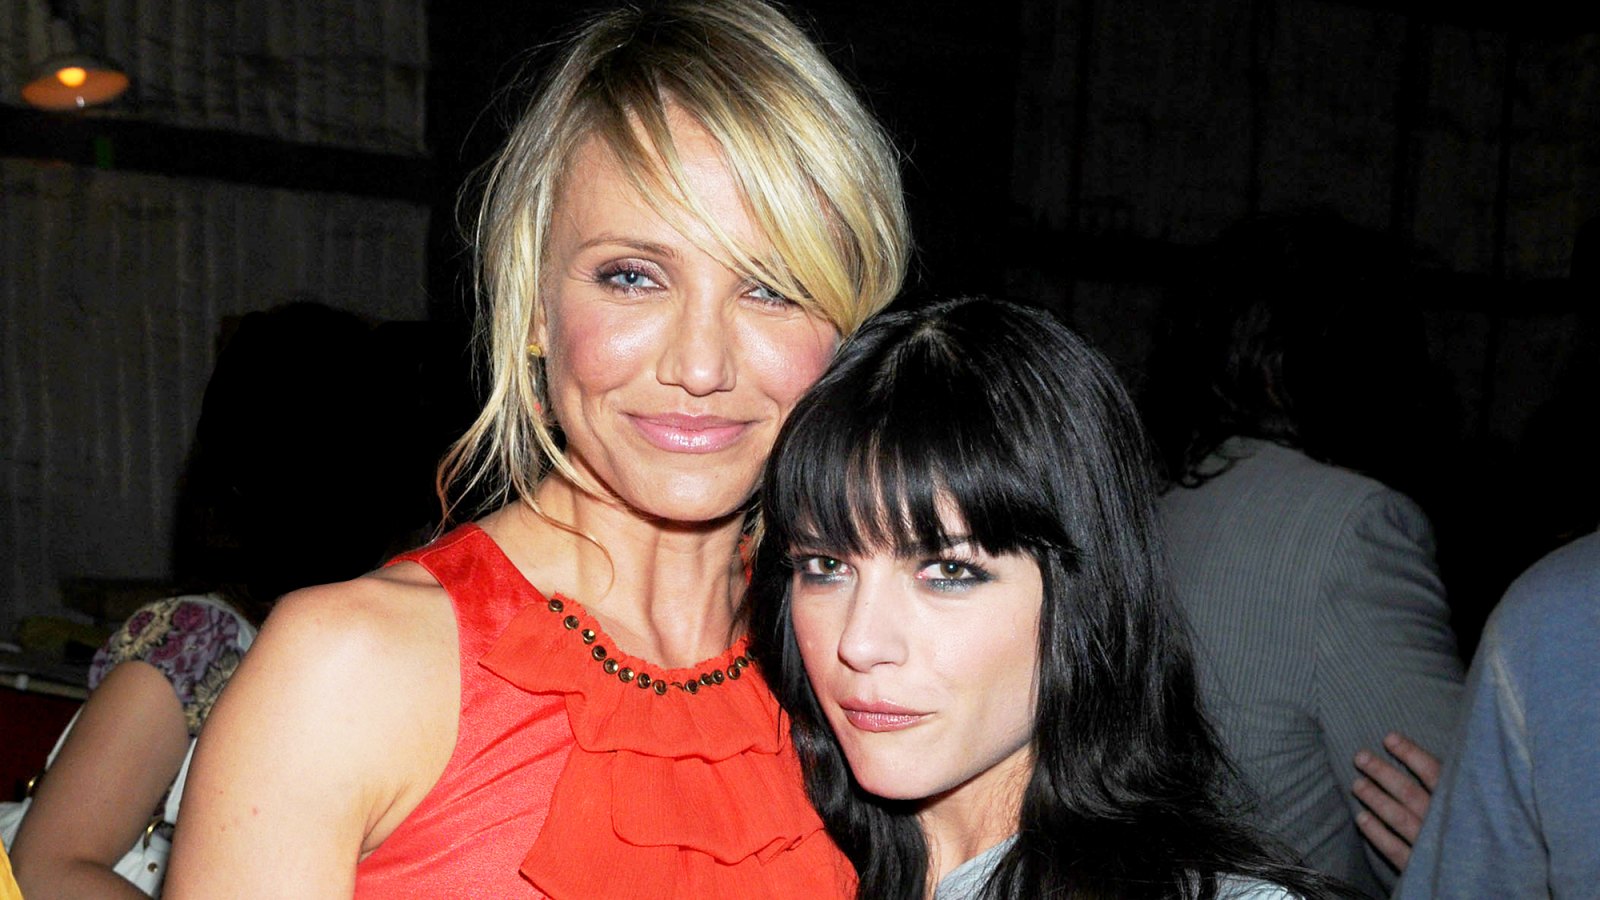 Cameron Diaz and Selma Blair attend Spike TV's 2nd Annual Guys Choice 2008 Awards at Sony Studios in Culver City, California.